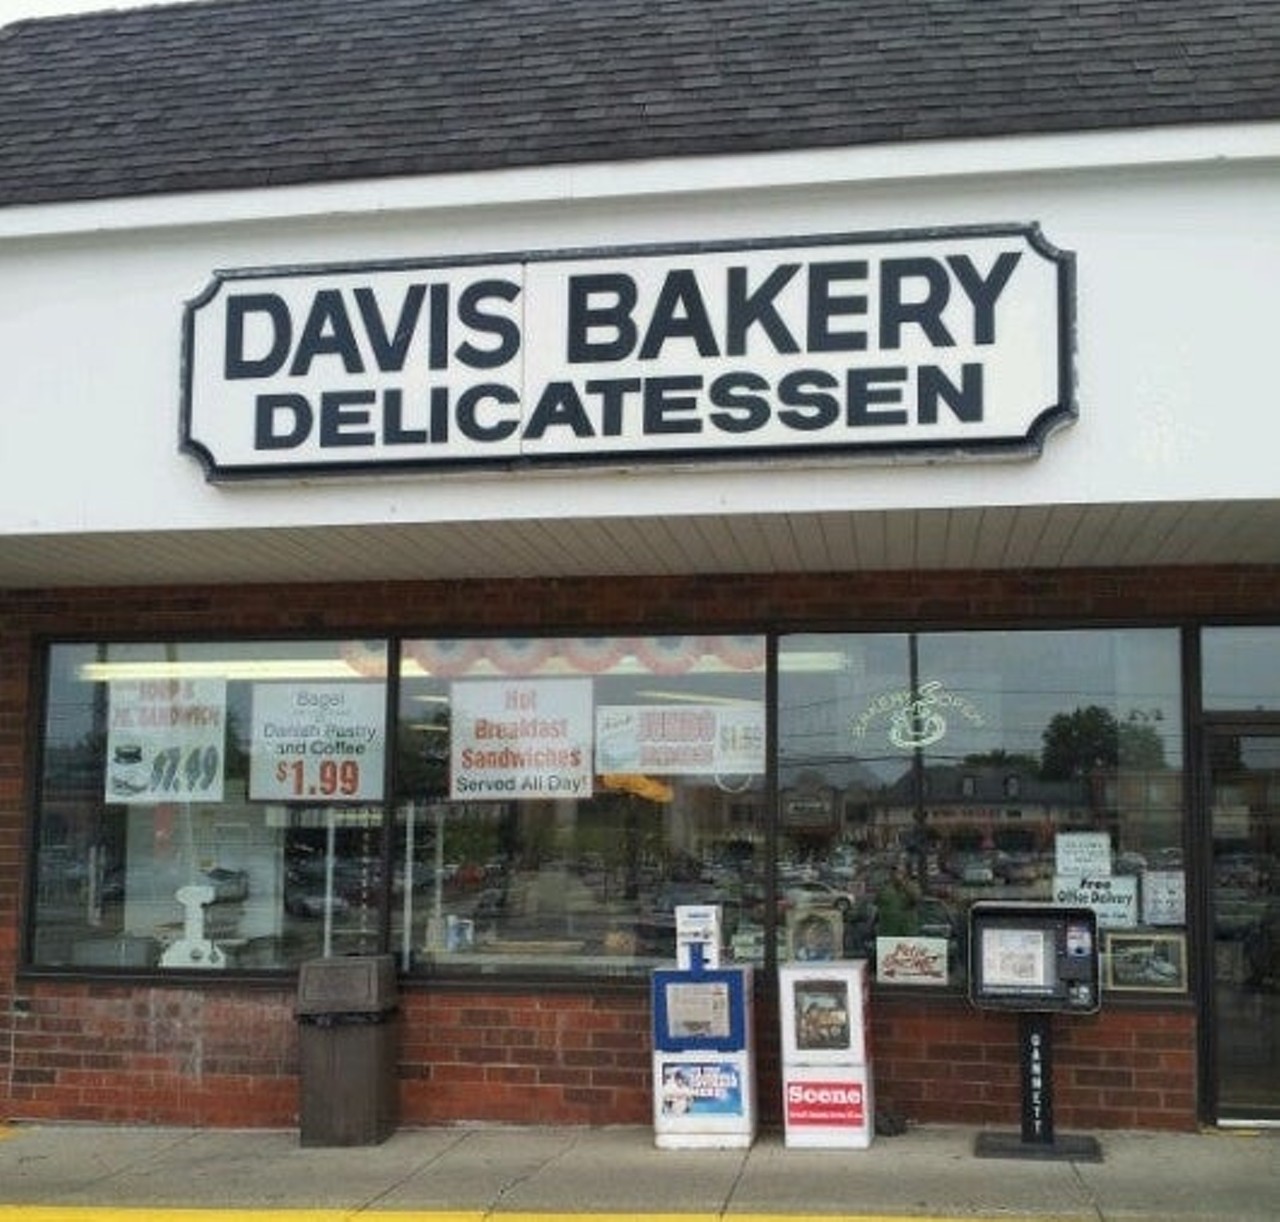  Davis Bakery and Deli
28700 Chagrin Blvd., Woodmere and 4572 Renaissance Pkwy., Cleveland 
With Wax and Mandel and Pincus bakeries closing in recent years, Davis Bakery is one of the only Jewish bakeries left in town. Davis, which opened in 1939, is known for their coconut bars on the bakery side and their hot pastrami when it comes to sandwiches and savory food.
Photo via Davis Bakery/Facebook